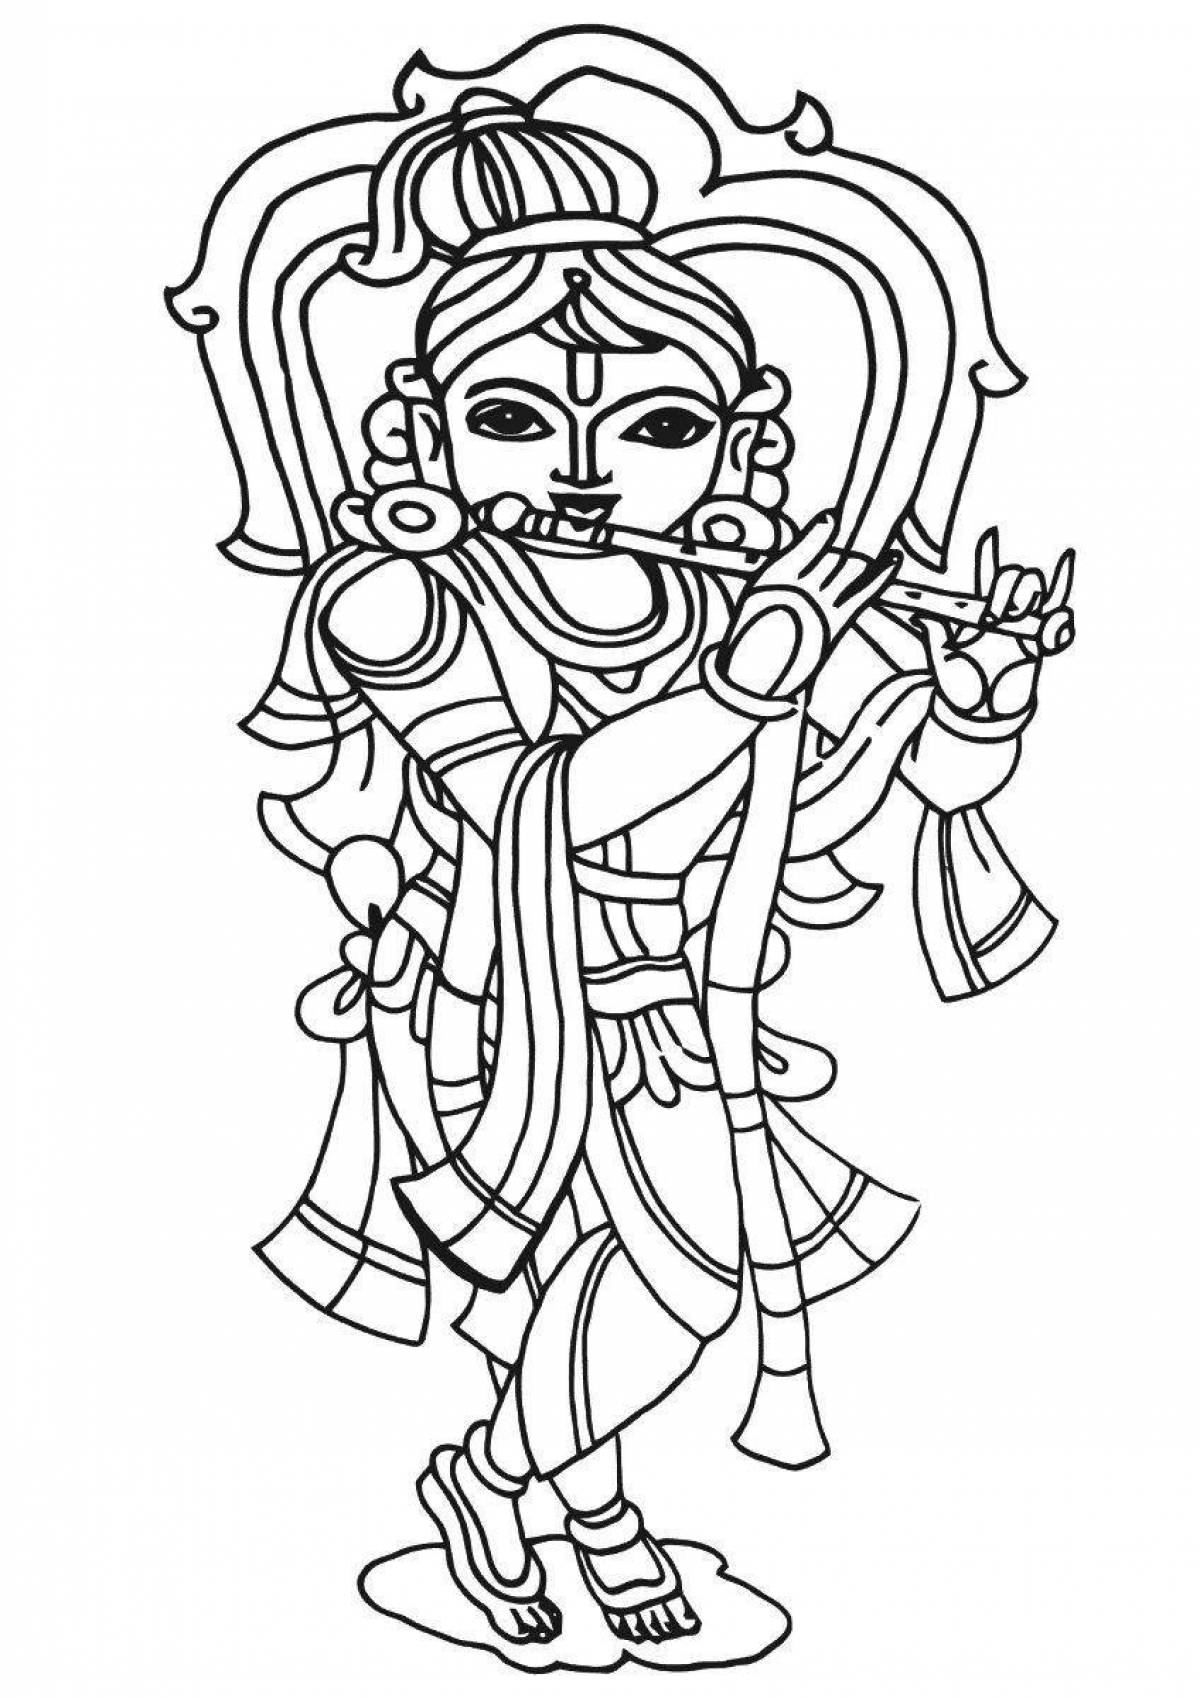 Awesome krishna coloring book